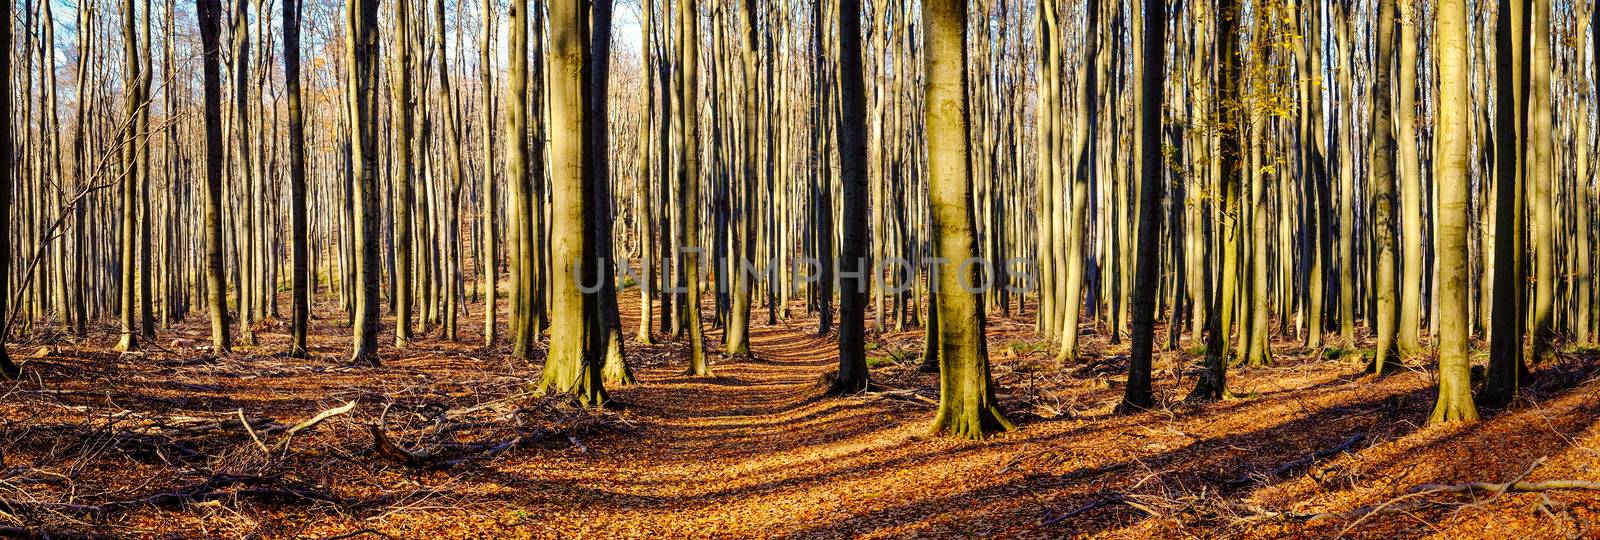 Panoramic view of tree trunks in autumn colorful forest